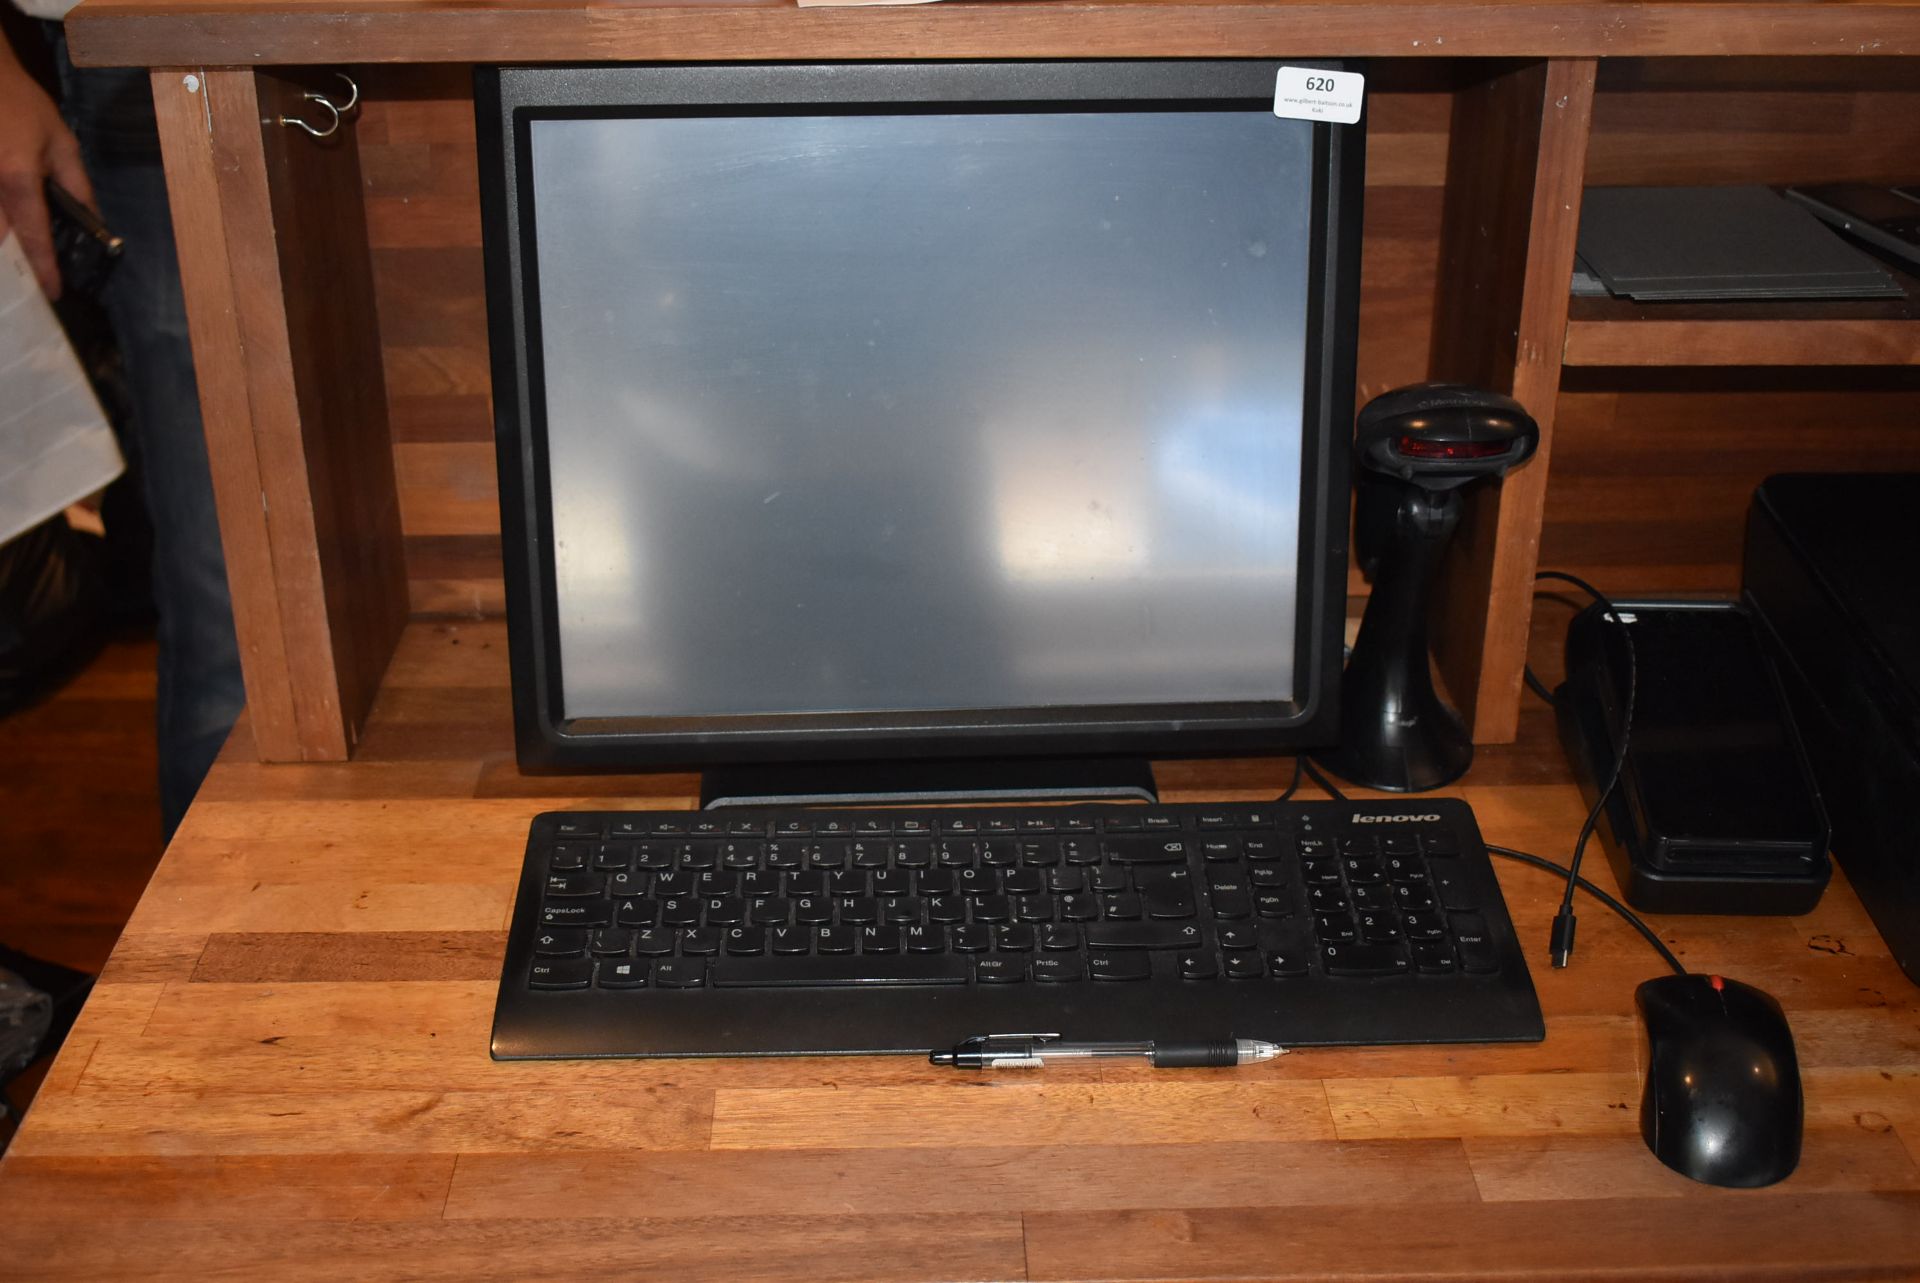 *Lenovo Thinkcentre Desktop Computer with Windows 8 OS, Monitor, Keyboard, Mouse, and Barcode